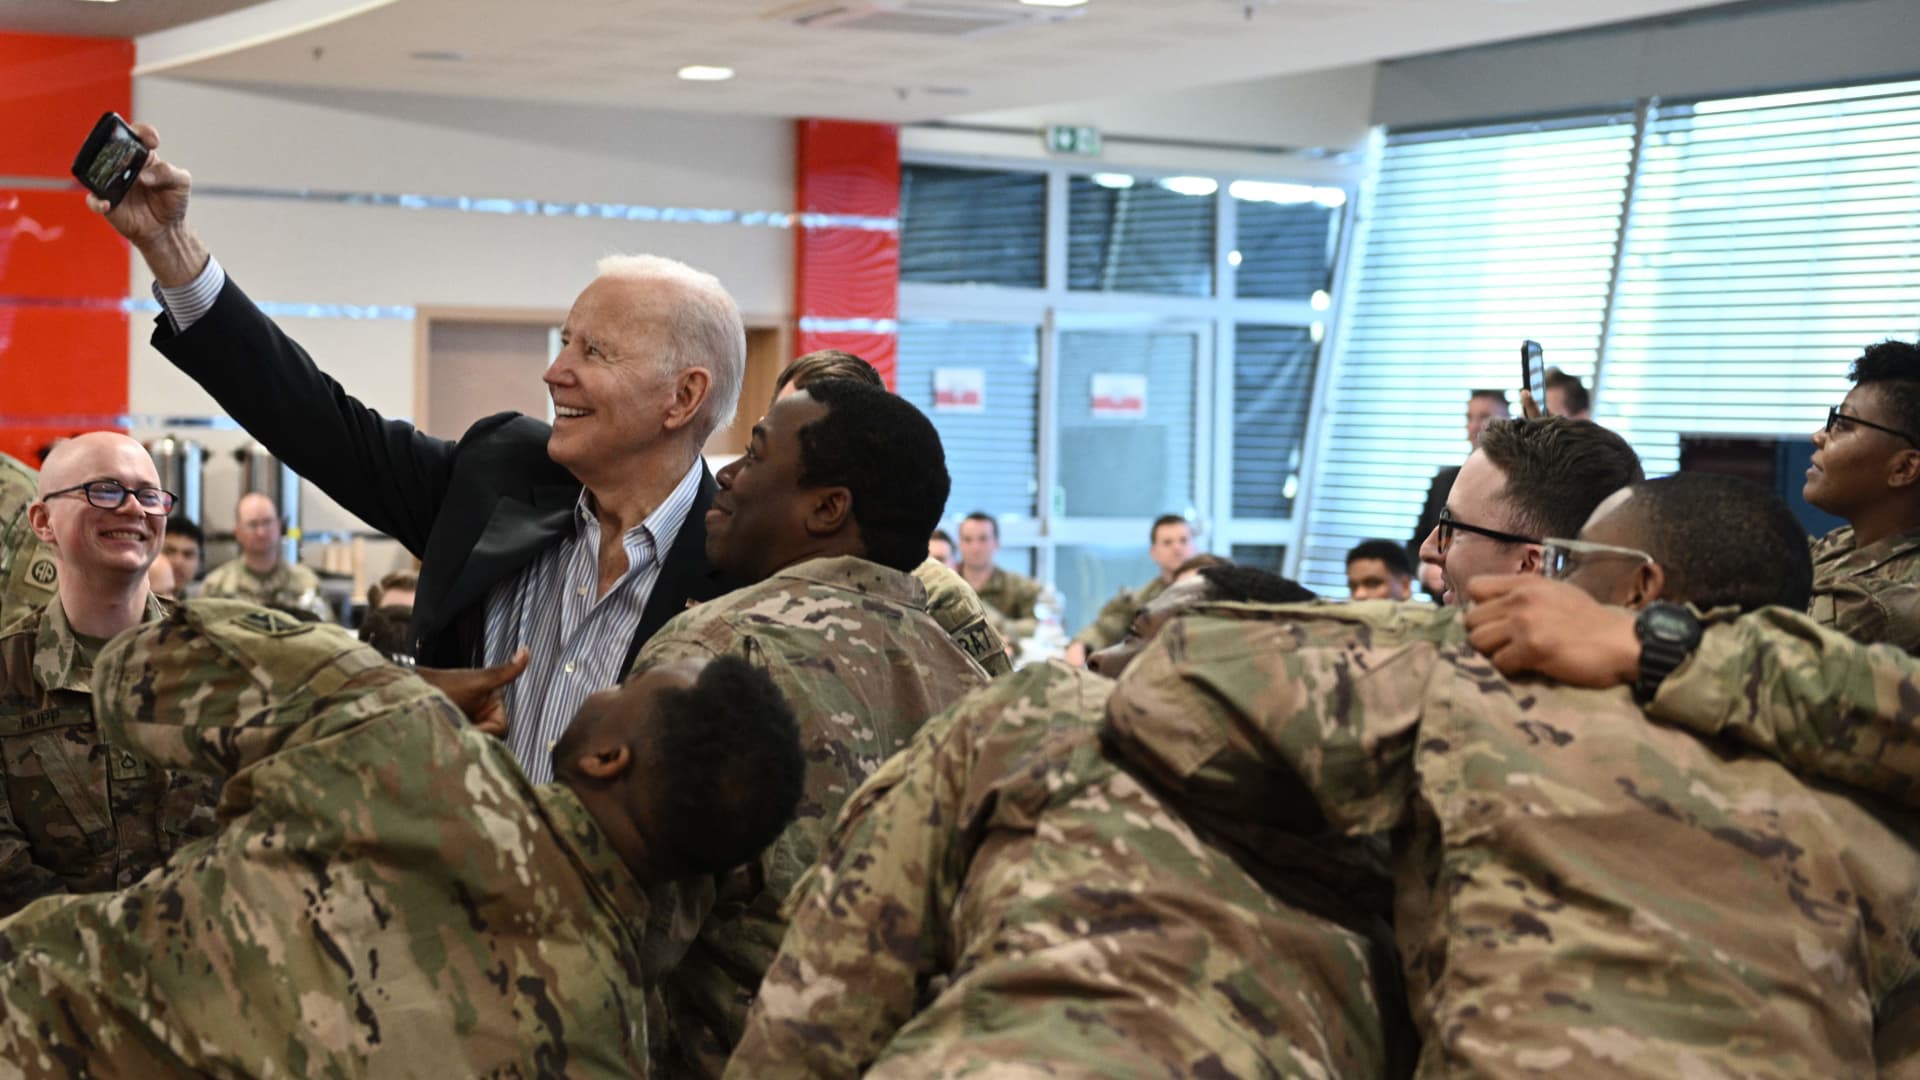 US President Joe Biden (L) takes a selfie photo as he meets service members from the 82nd Airborne Division, who are contributing alongside Polish Allies to deterrence on the Alliances Eastern Flank, in the city of Rzeszow in southeastern Poland, around 100 kilometres (62 miles) from the border with Ukraine, on March 25, 2022.